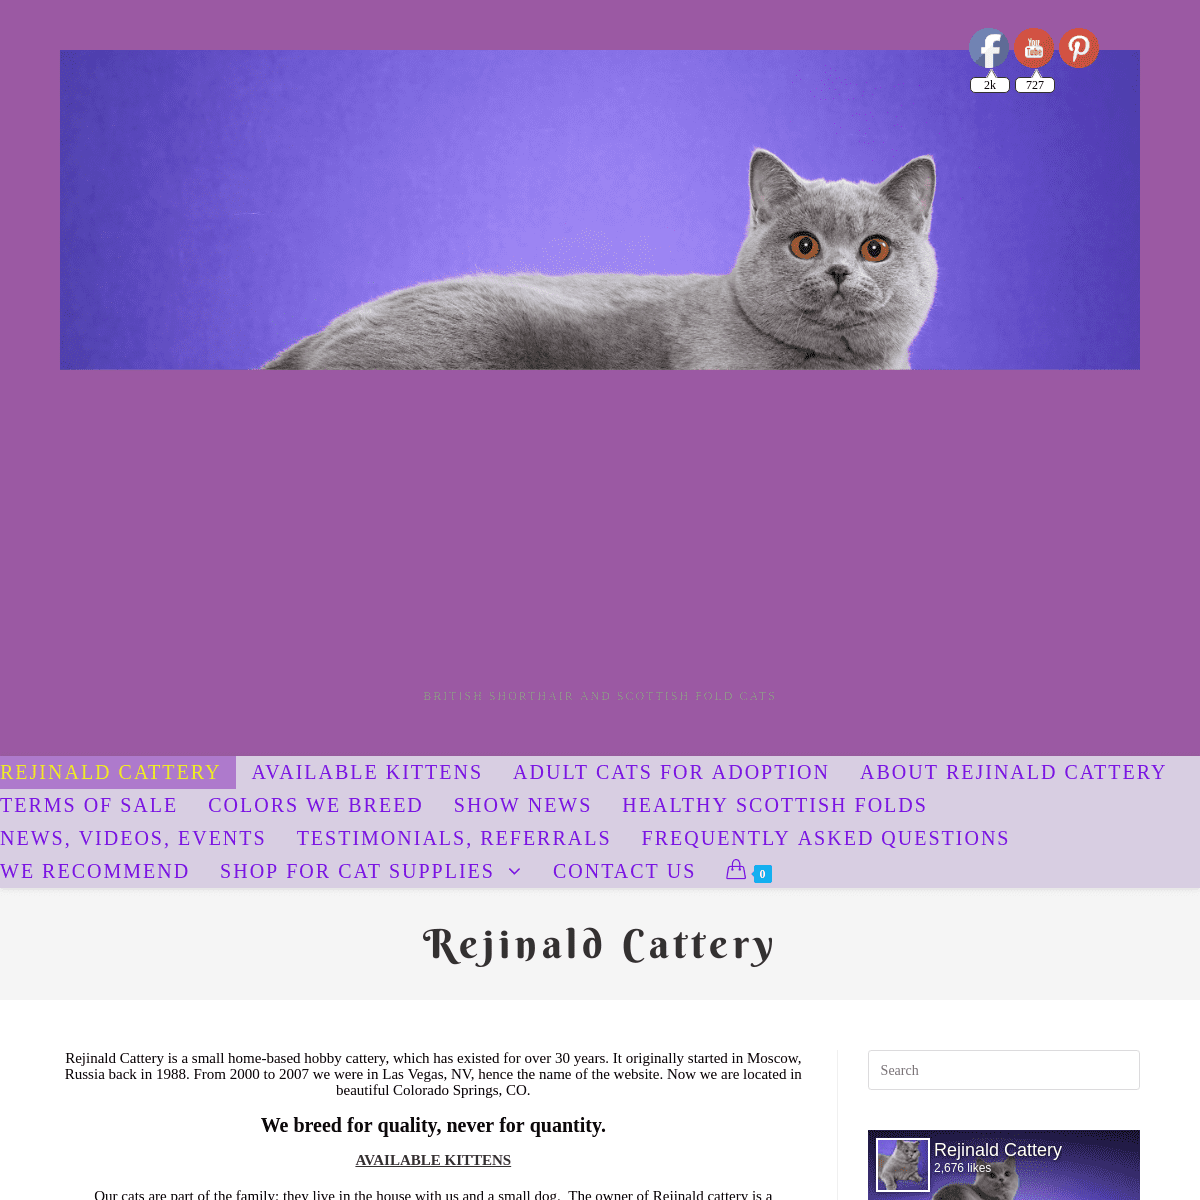 Rejinald Cattery – British Shorthair and Scottish Fold Cats